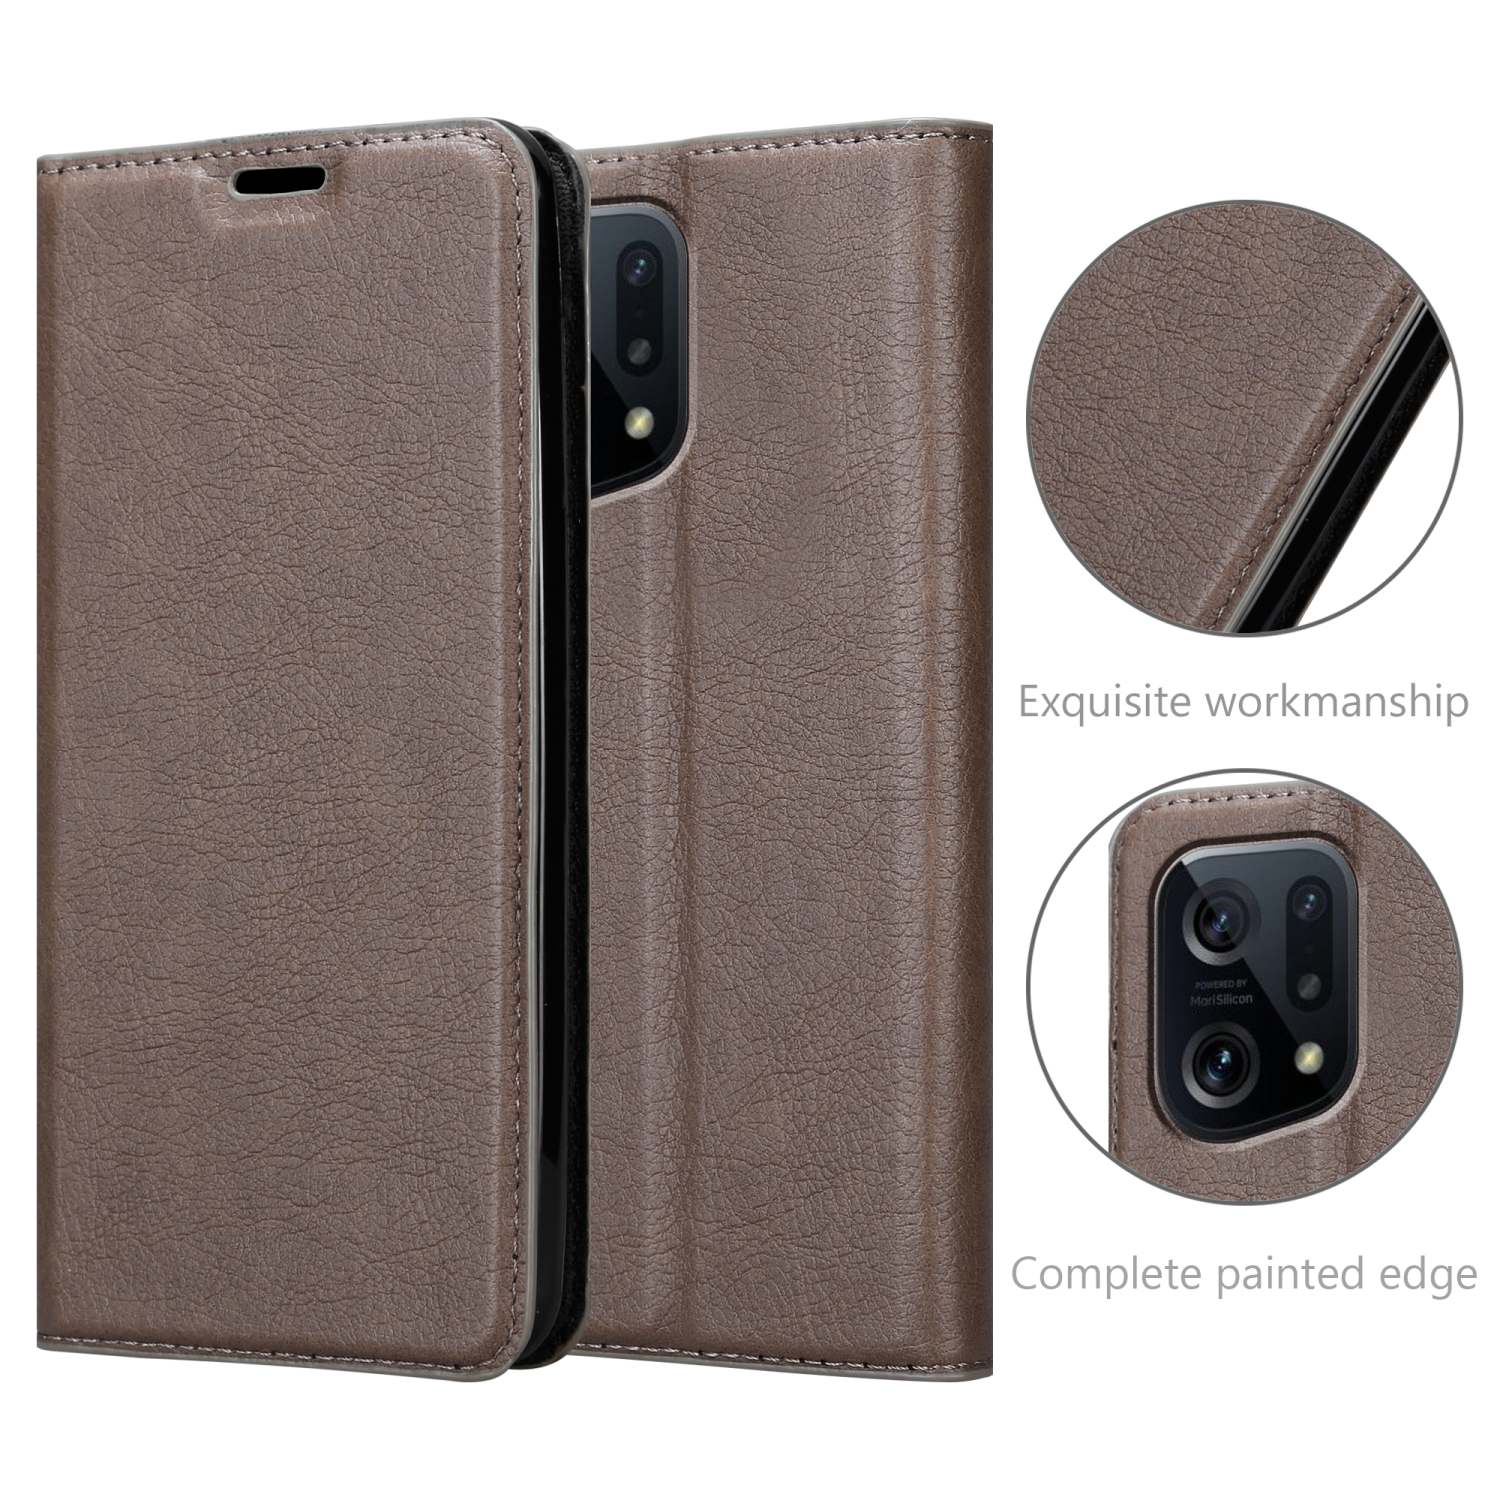 Oppo, Hülle Invisible FIND BRAUN Book KAFFEE Magnet, Bookcover, CADORABO X5,